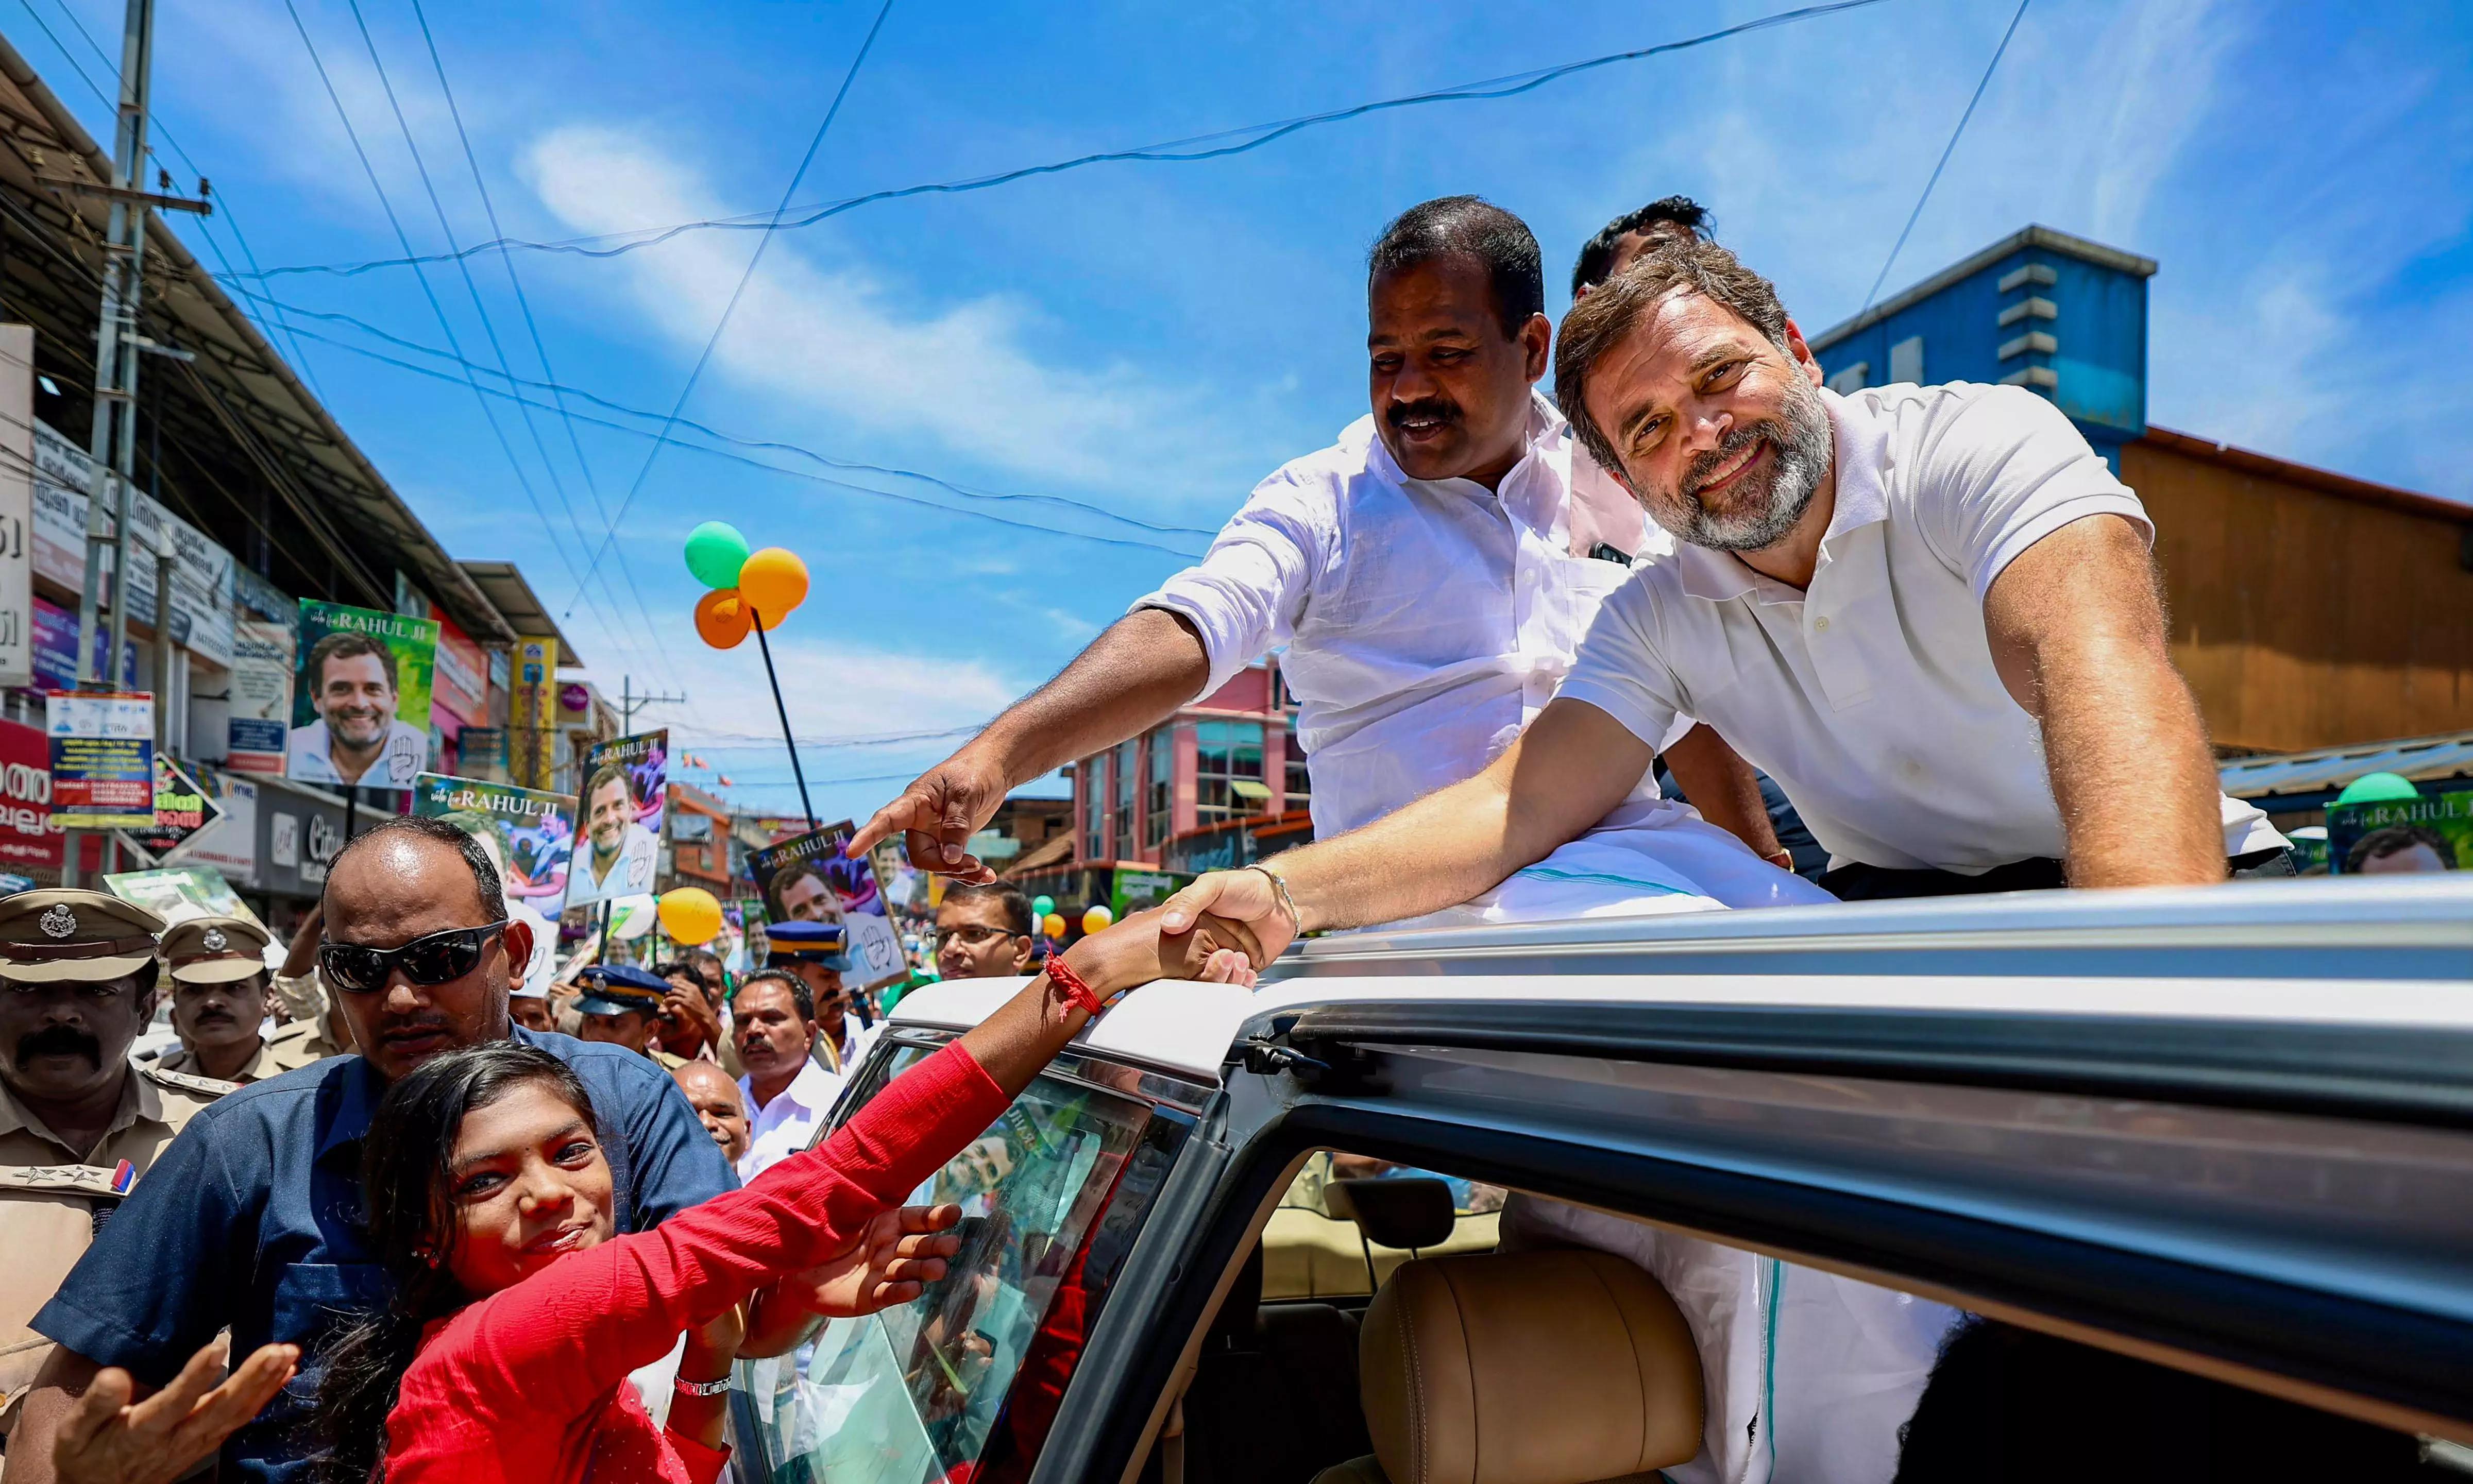 Rahul praises Wayanads beauty, says he has plans to invite Sonia to visit place